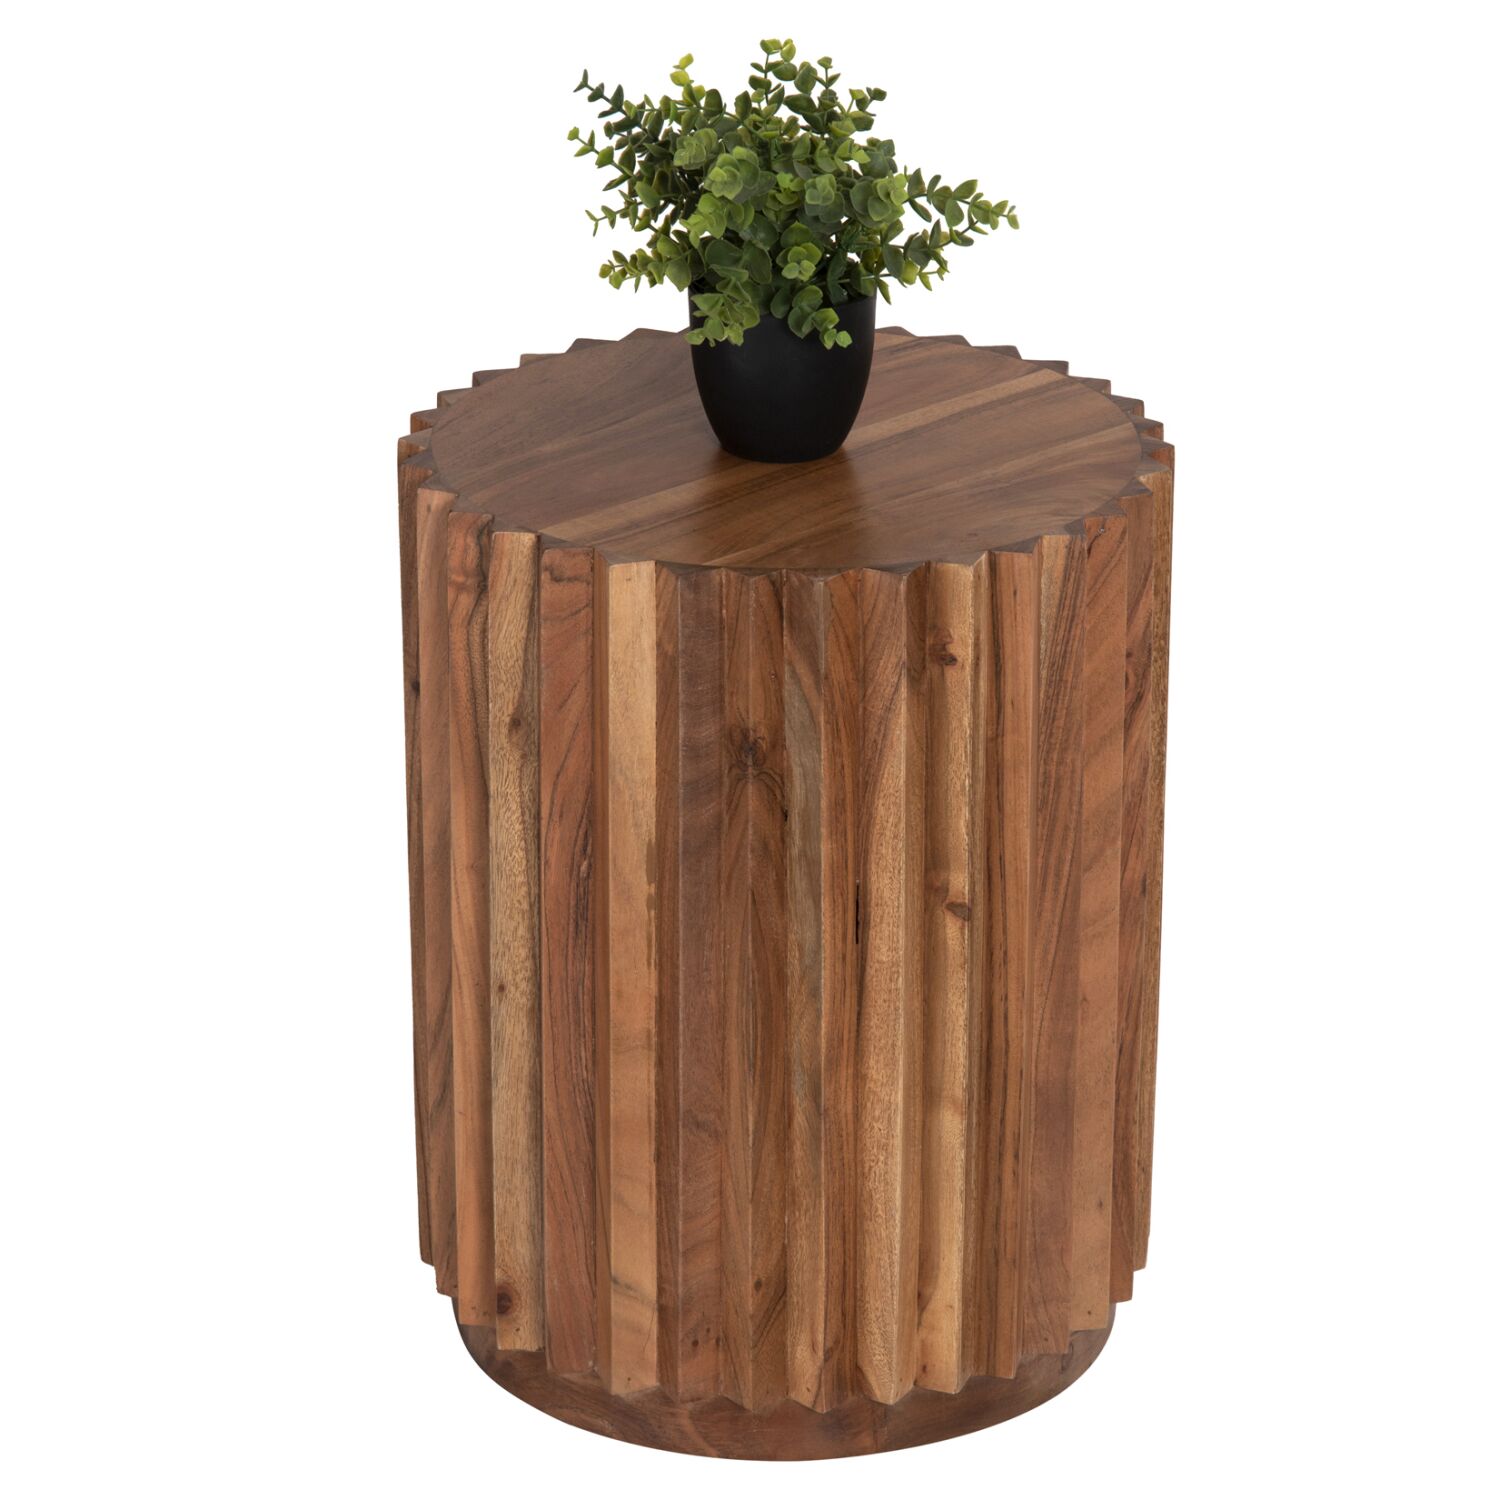 SIDE TABLE ROUND SEDGE HM9696 SOLID ACACIA-NATURAL COLOR Φ40x50Hcm.